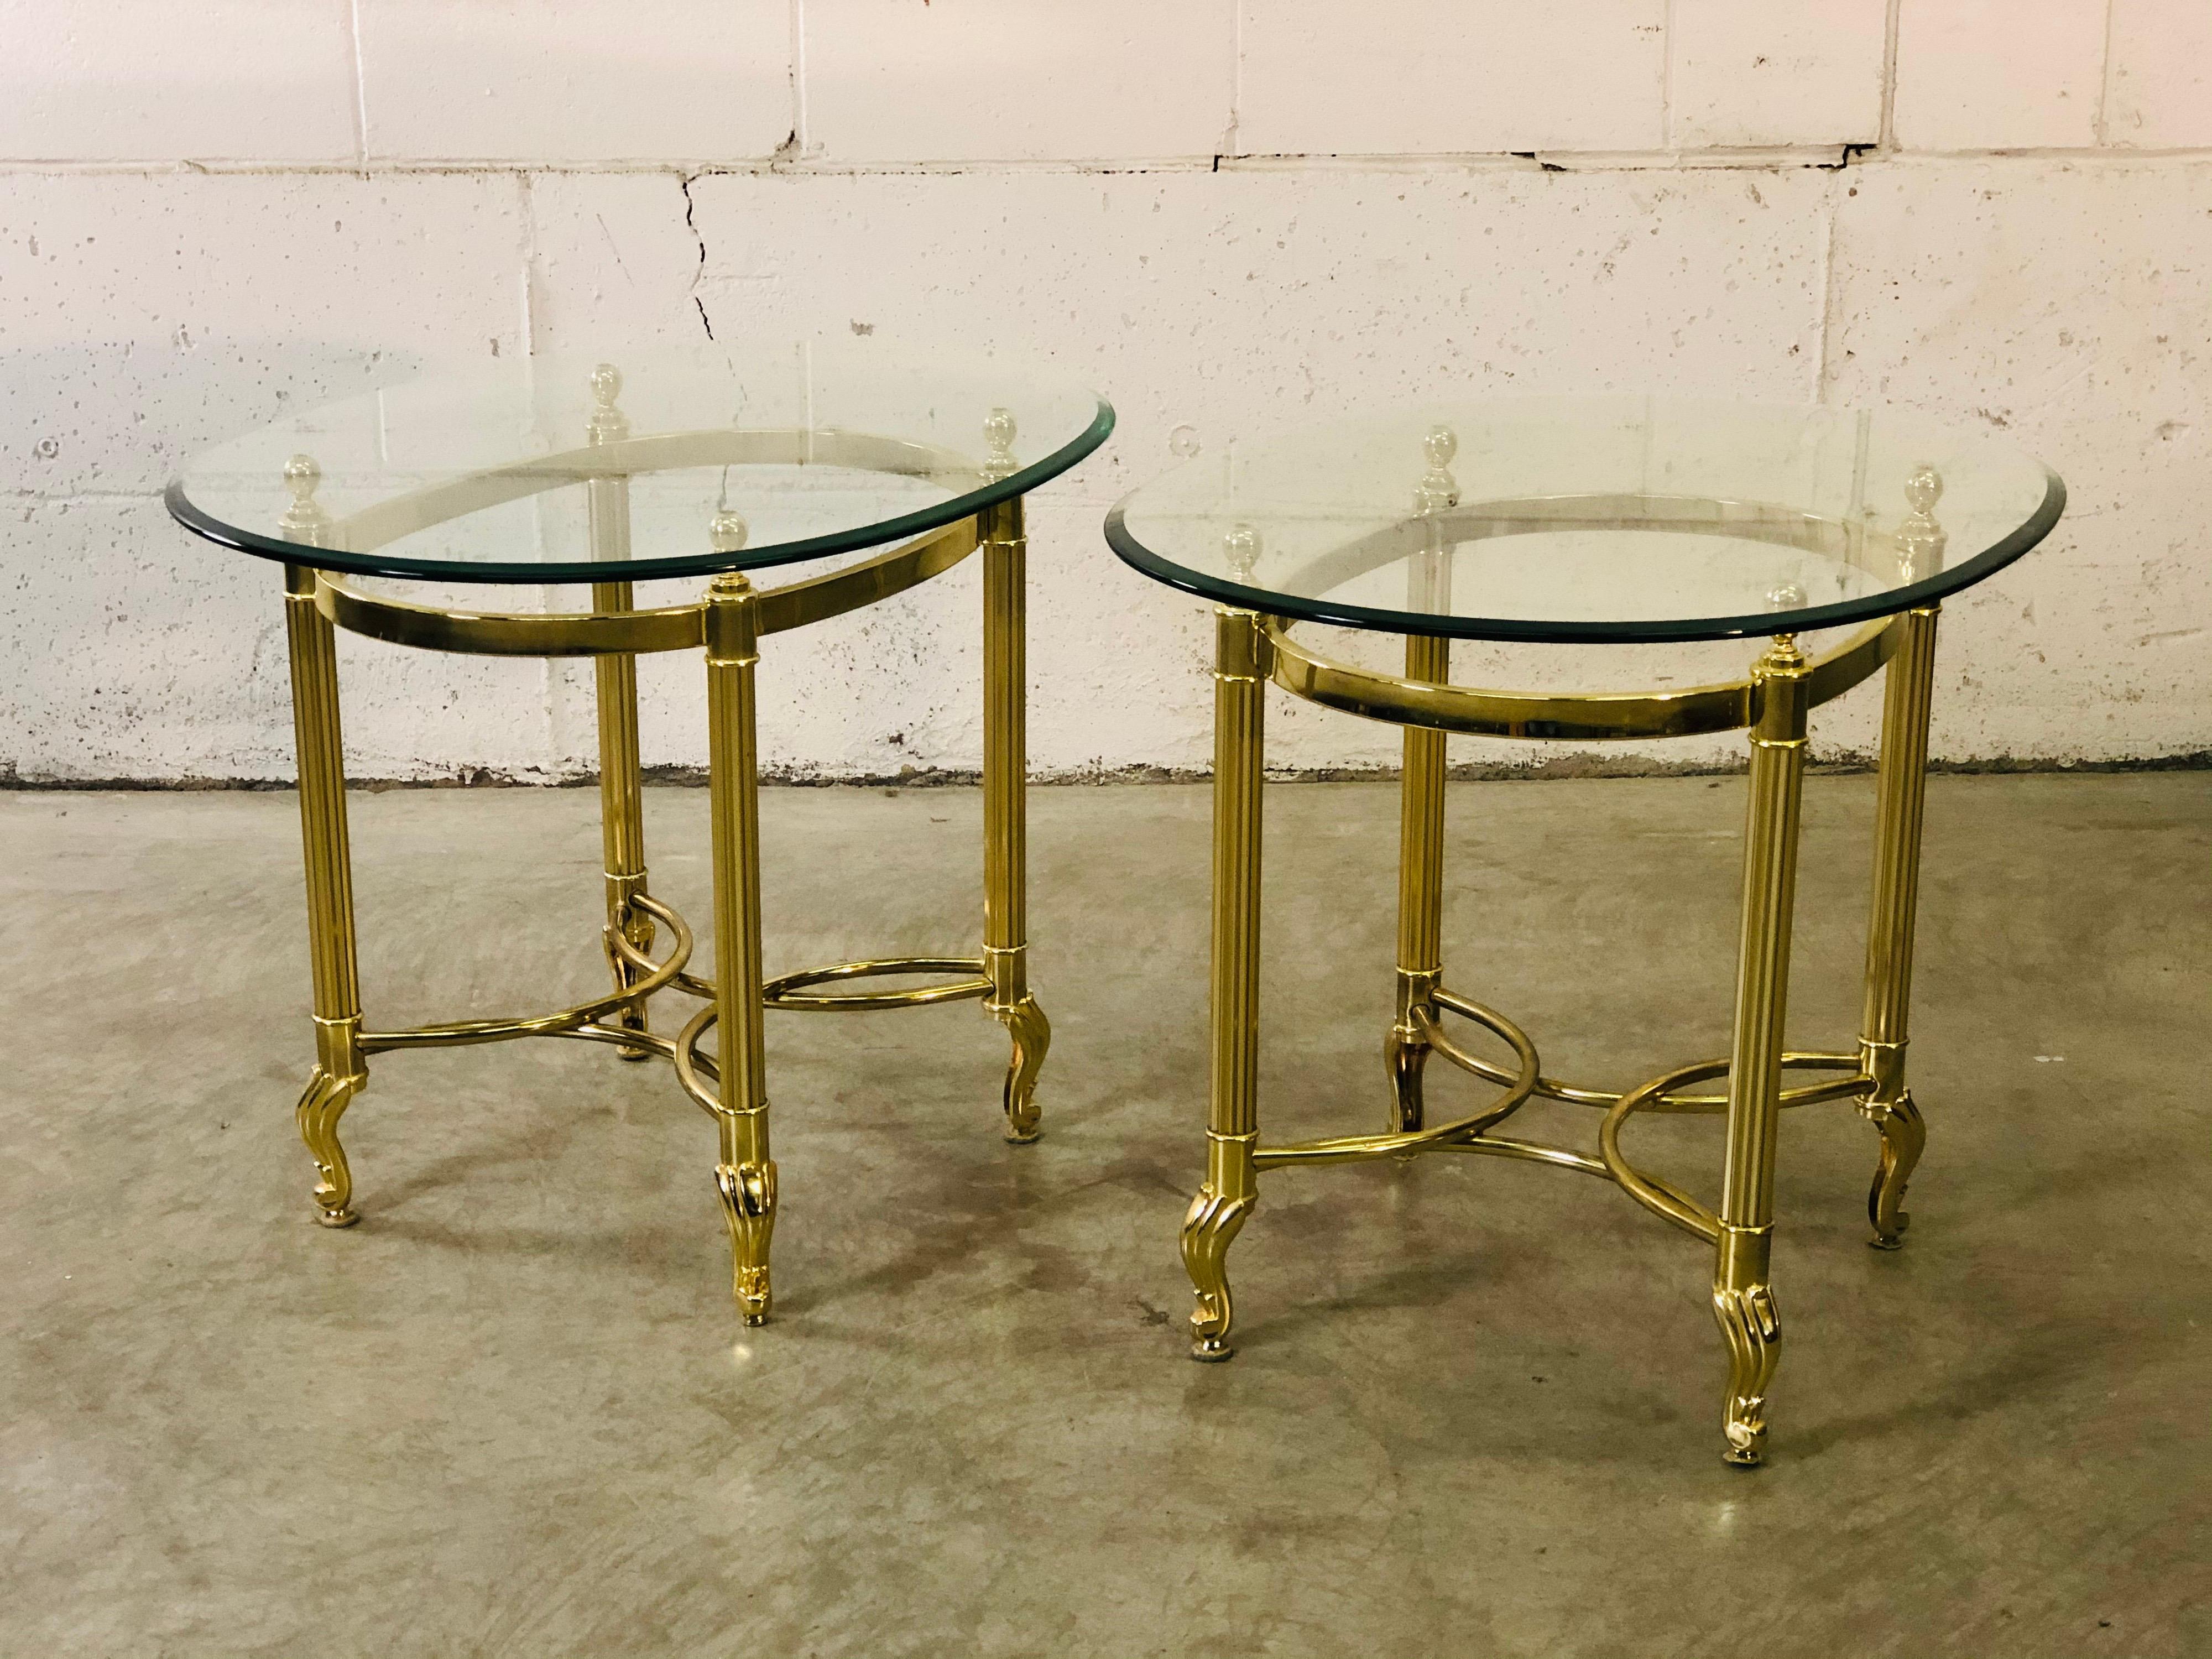 Vintage 1960s pair of brass and glass top side tables by LaBarge. The feet have a scroll design. Light tarnish from age in spots. No marks.